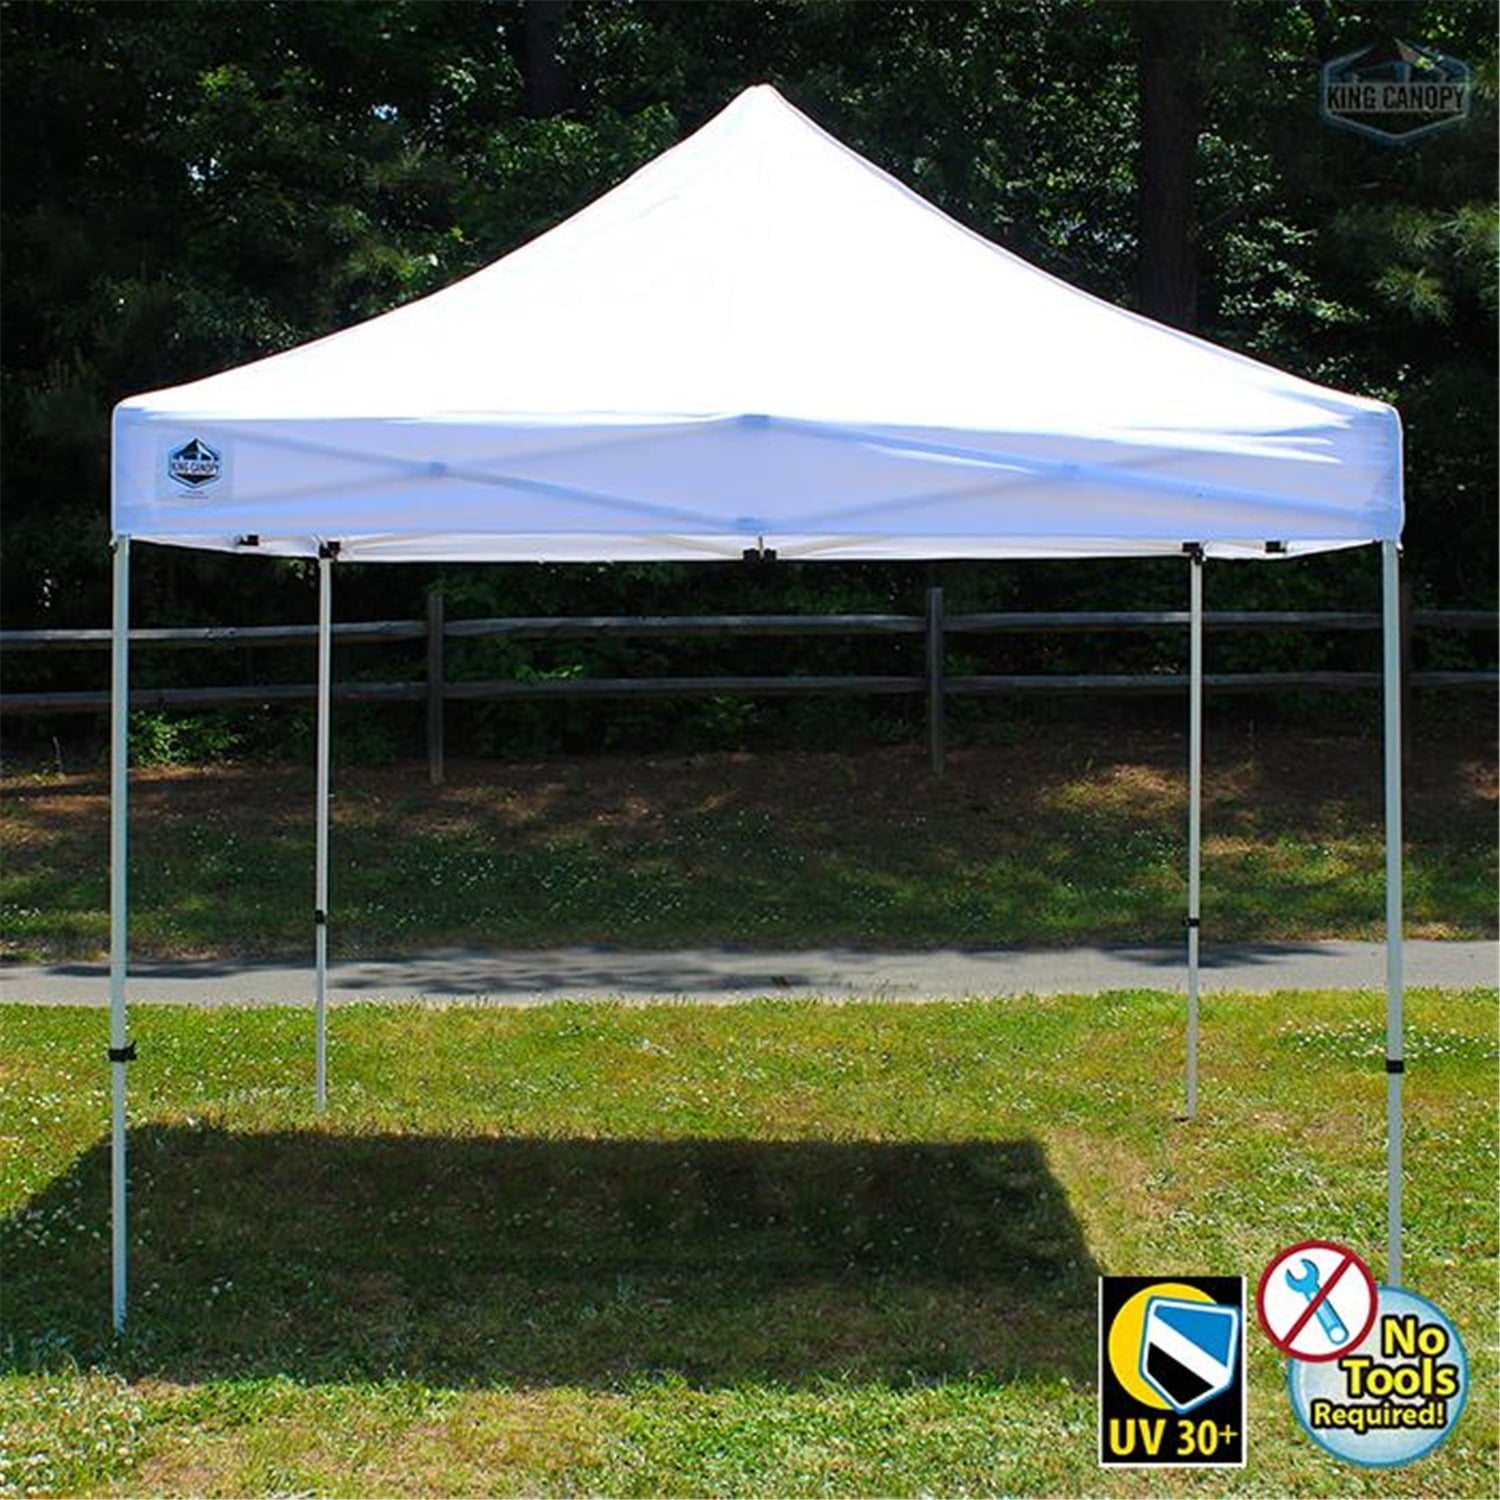 King Canopy Festival Instant Pop Up Tent with Cover-Size:10' x10',Style:White Cover